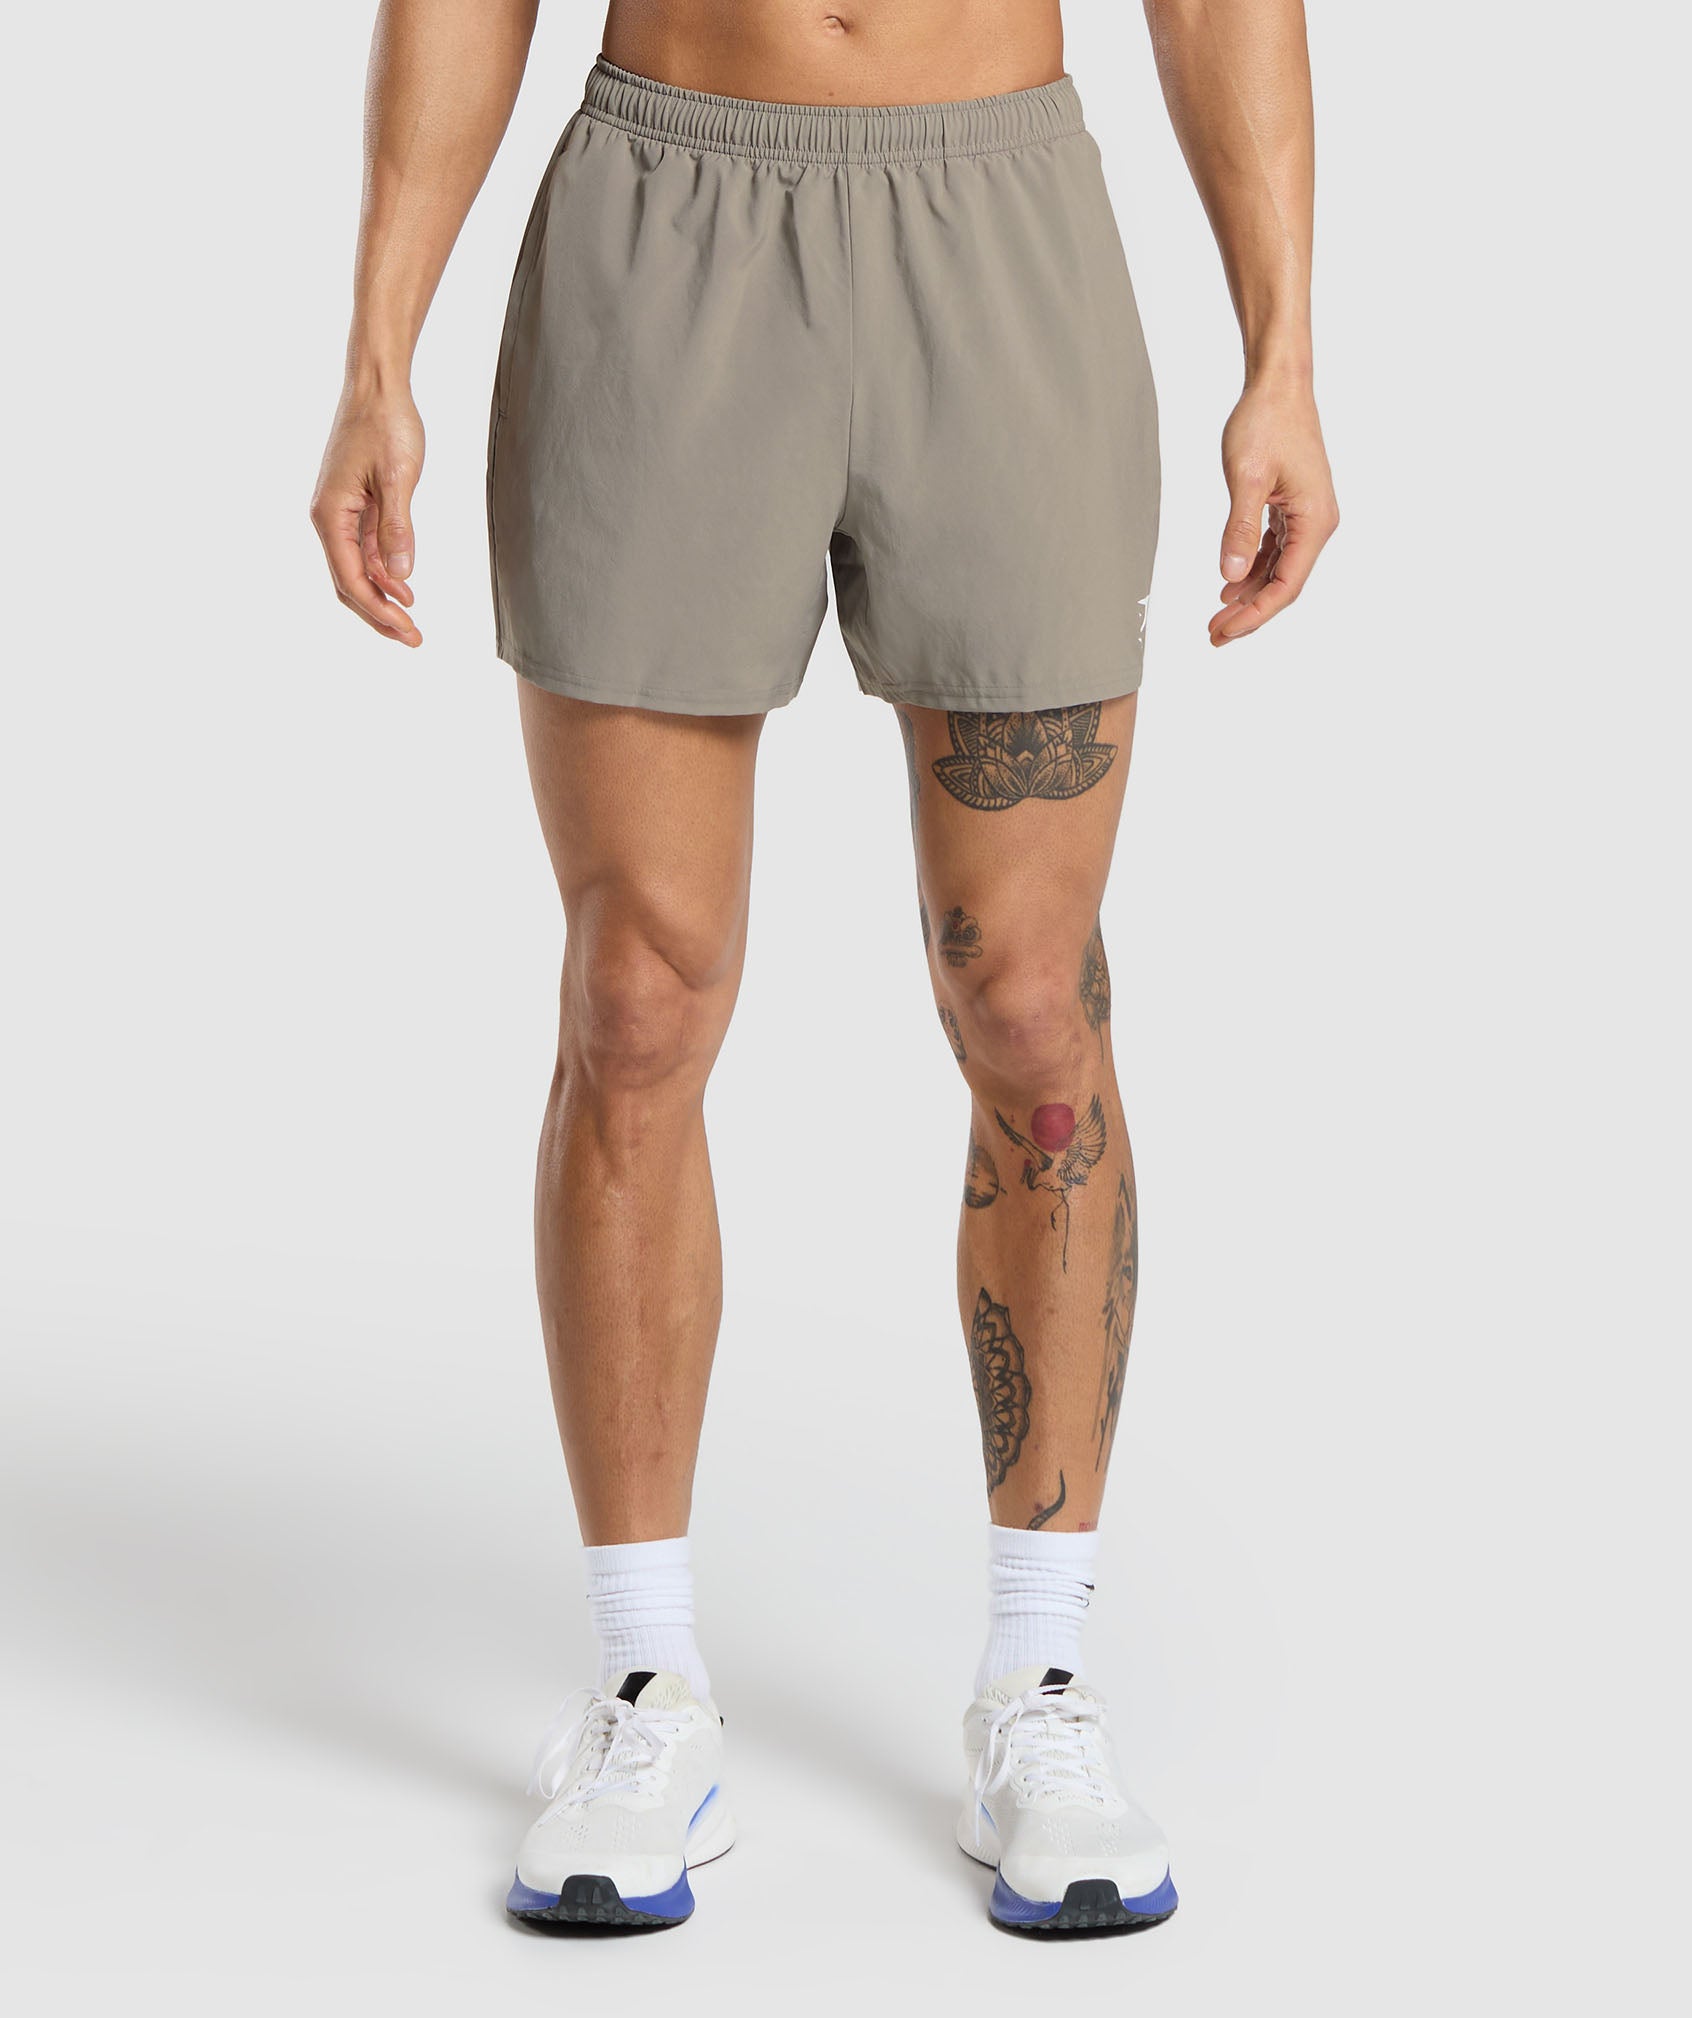 Arrival 5" Shorts in Linen Brown